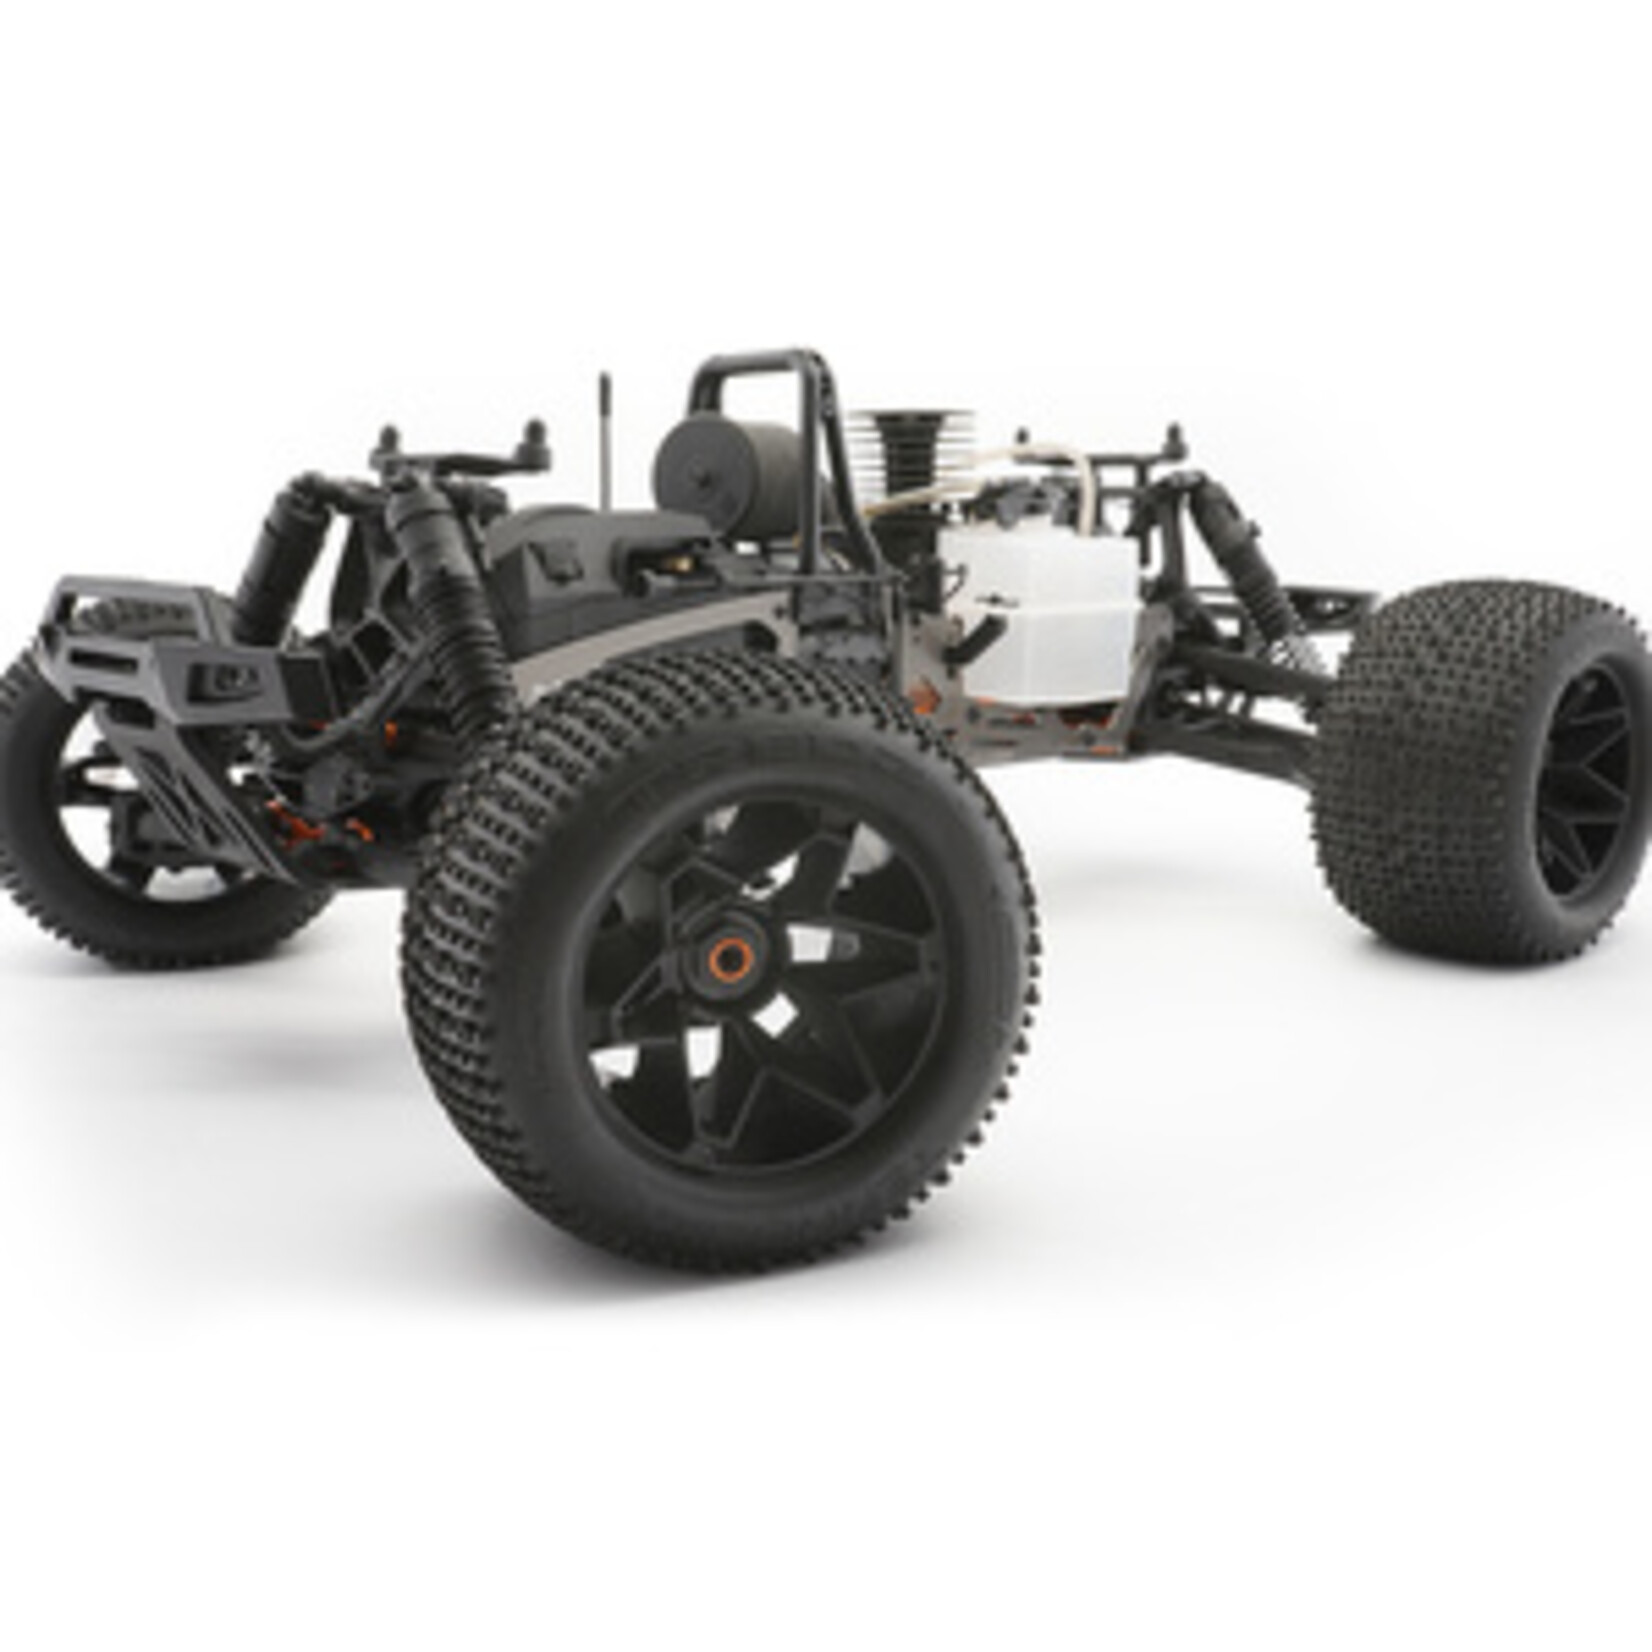 HPI Racing HPI160102  Savage XL 5.9 GTXL-6 Nitro Powered Monster Truck RTR, 1/8 scale, 4WD, 2.4GHz Radio System